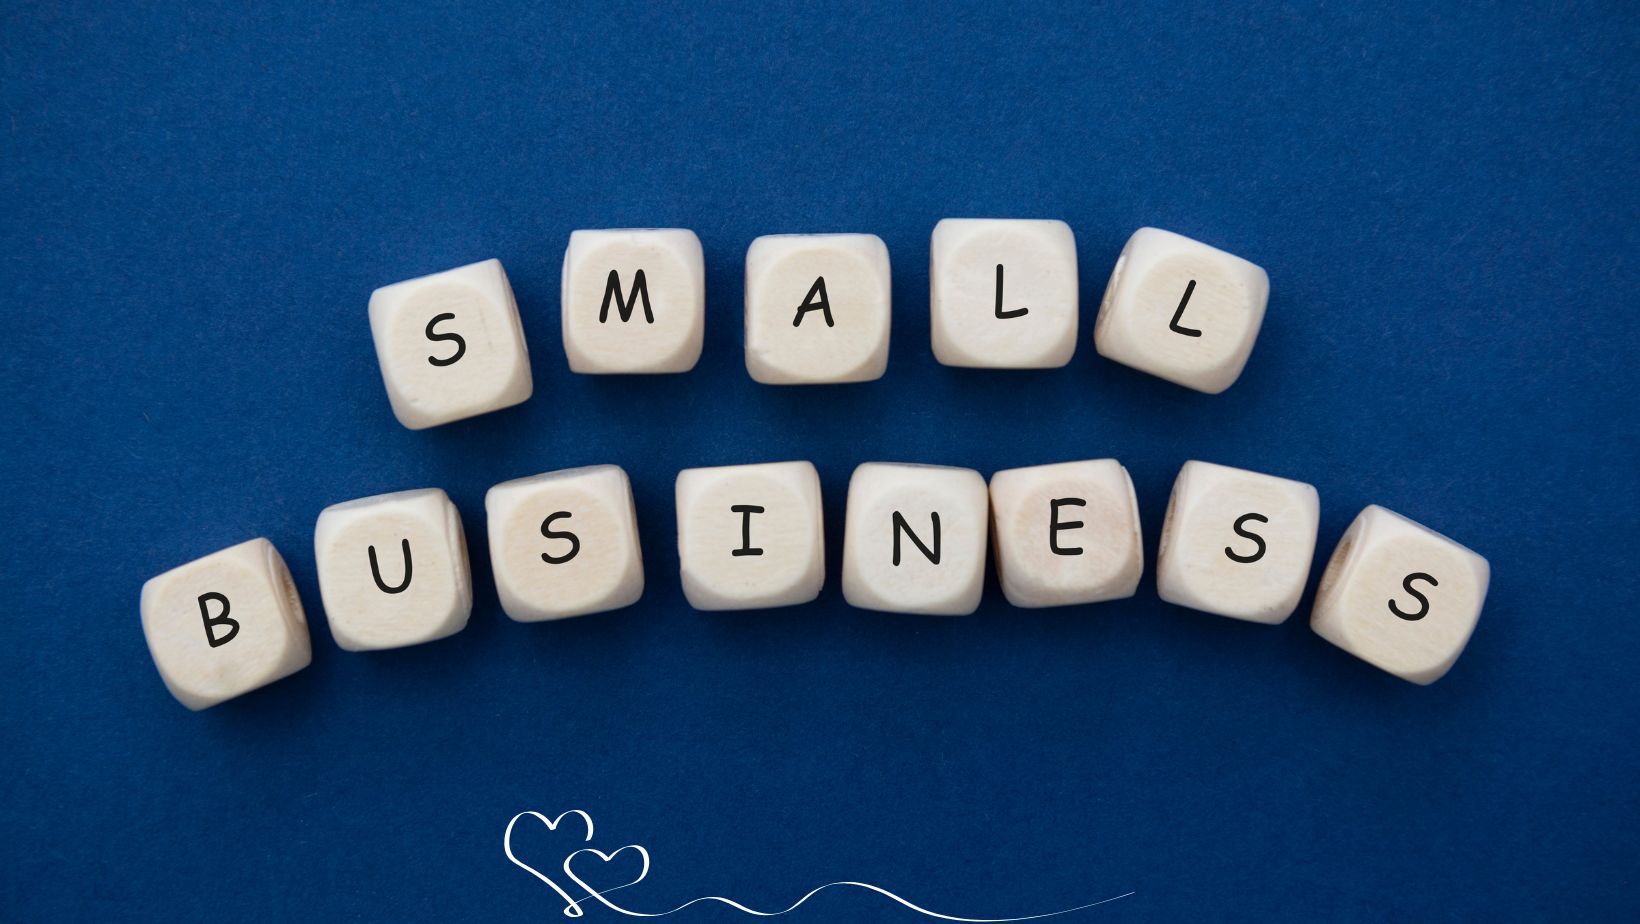 Emelia's Support Small business